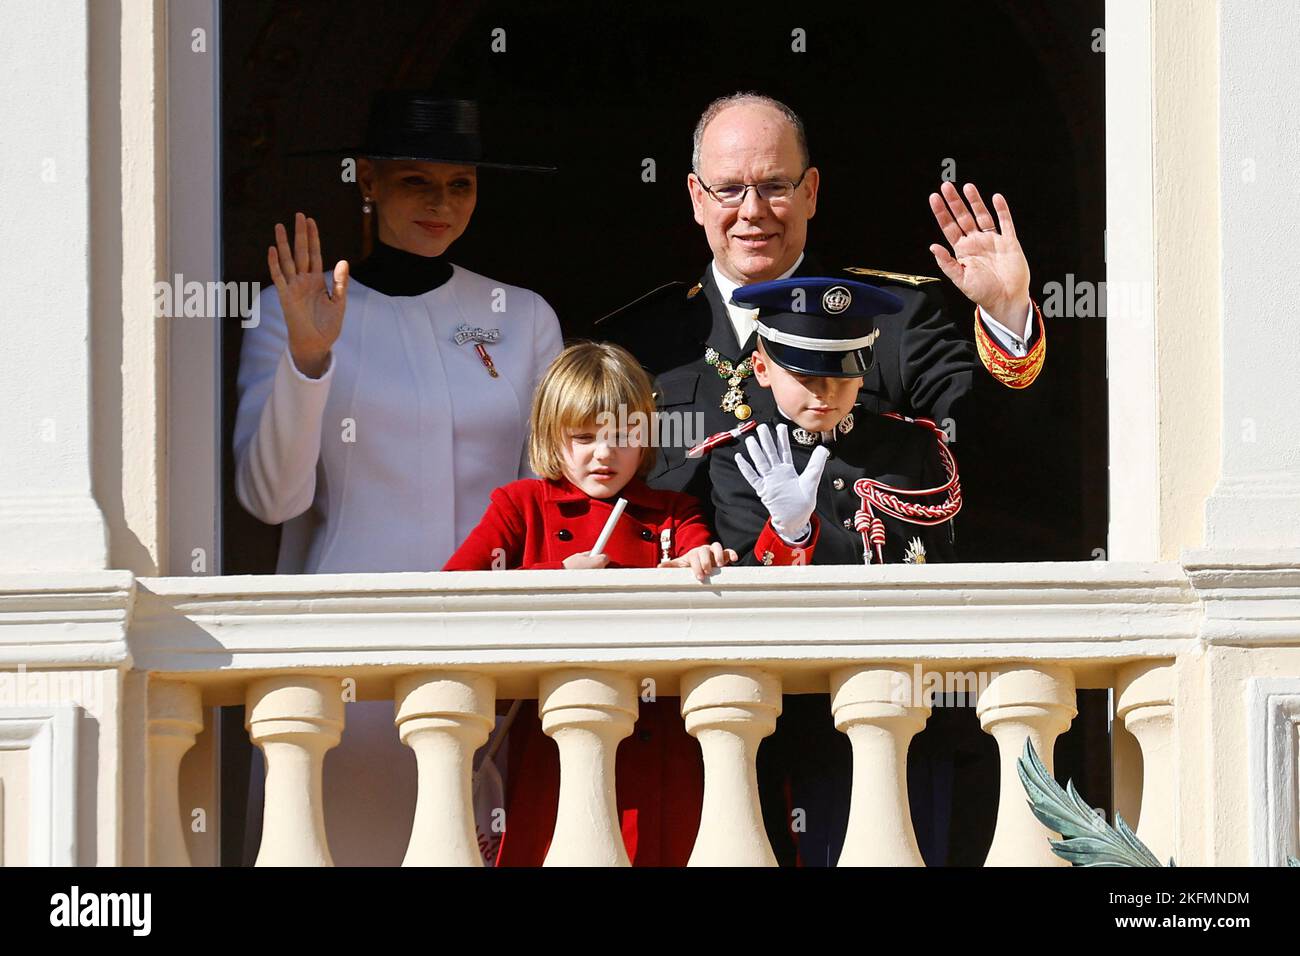 Prince Albert II of Monaco, Princess Charlene, Prince Jacques and Princess Gabriella stand on the Palace balcony during the celebrations marking Monaco's National Day in Monaco, November 19, 2022. REUTERS/Eric Gaillard Stock Photo